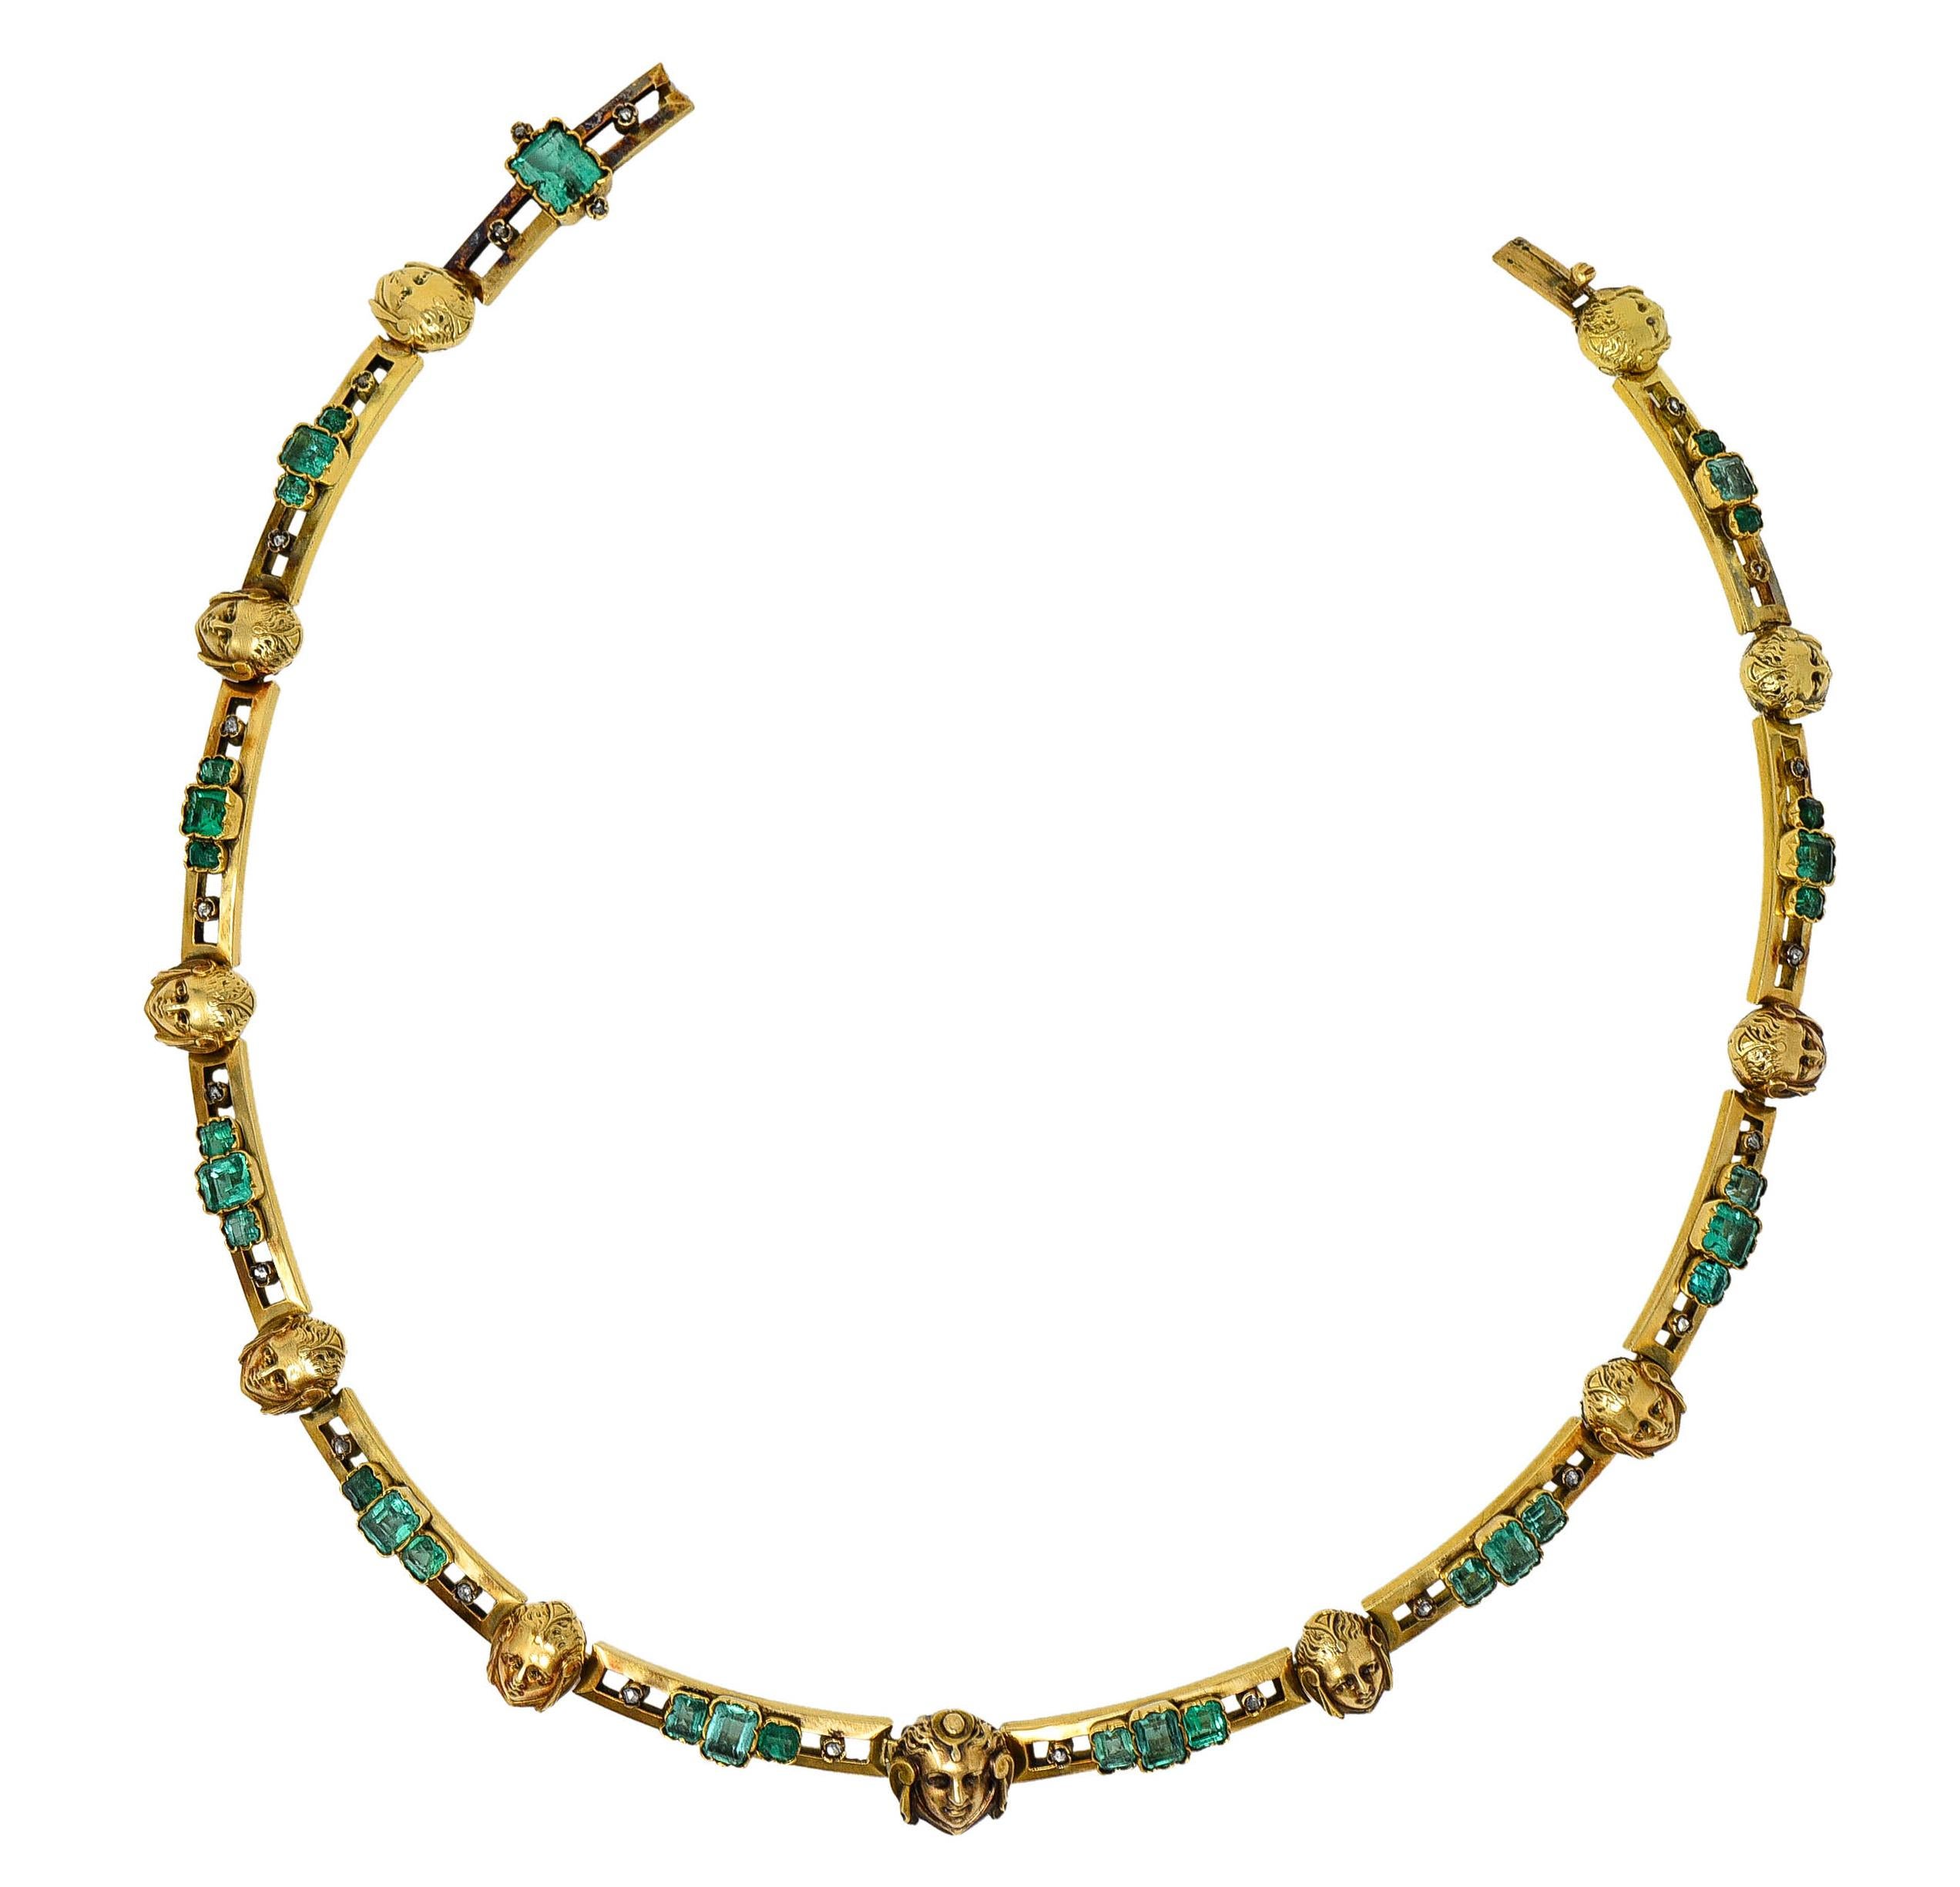 Collar necklace is designed as pierced bar links alternating with highly rendered stations

Stations depict a female face adorned by a scrolled headdress with center face larger and more detailed

Center face has an optional bale that folds down to